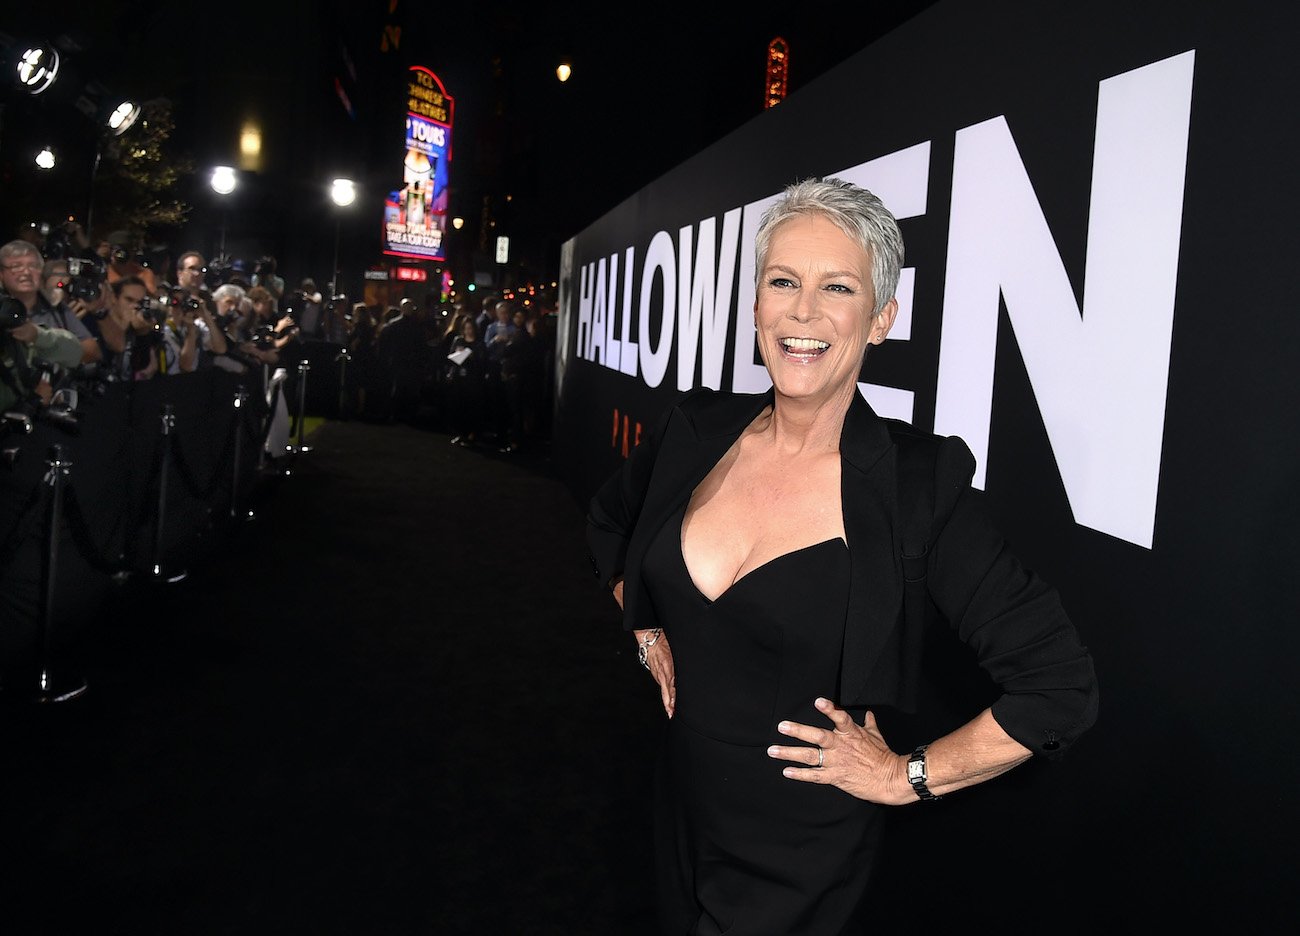 Jamie lee Curtis at the Premiere of 'Halloween,' posing for pictures